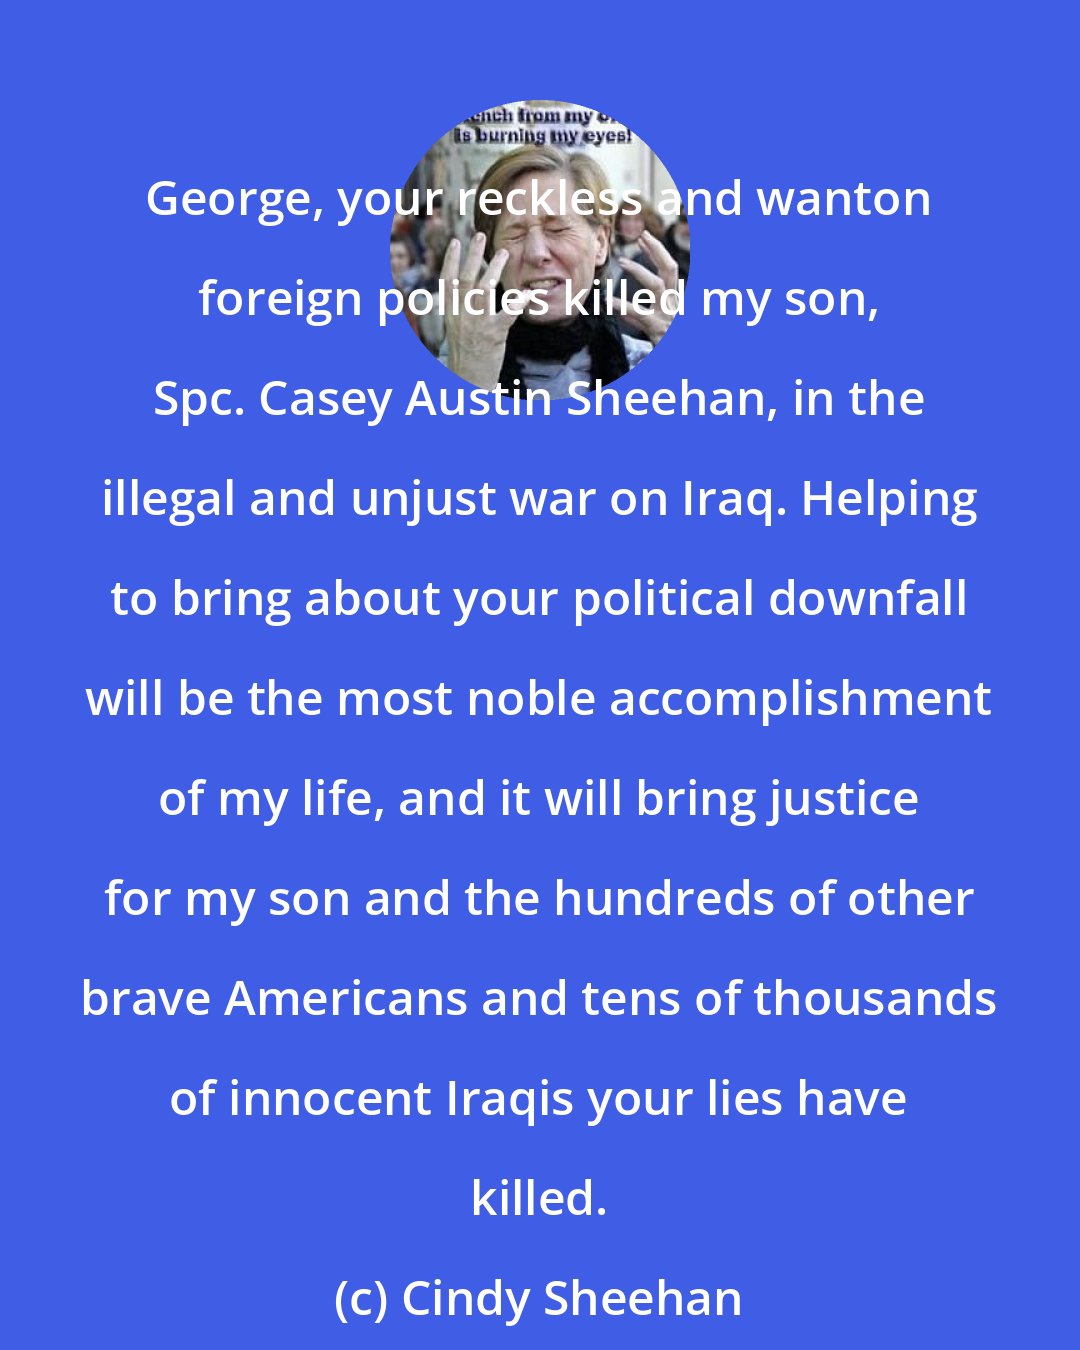 Cindy Sheehan: George, your reckless and wanton foreign policies killed my son, Spc. Casey Austin Sheehan, in the illegal and unjust war on Iraq. Helping to bring about your political downfall will be the most noble accomplishment of my life, and it will bring justice for my son and the hundreds of other brave Americans and tens of thousands of innocent Iraqis your lies have killed.